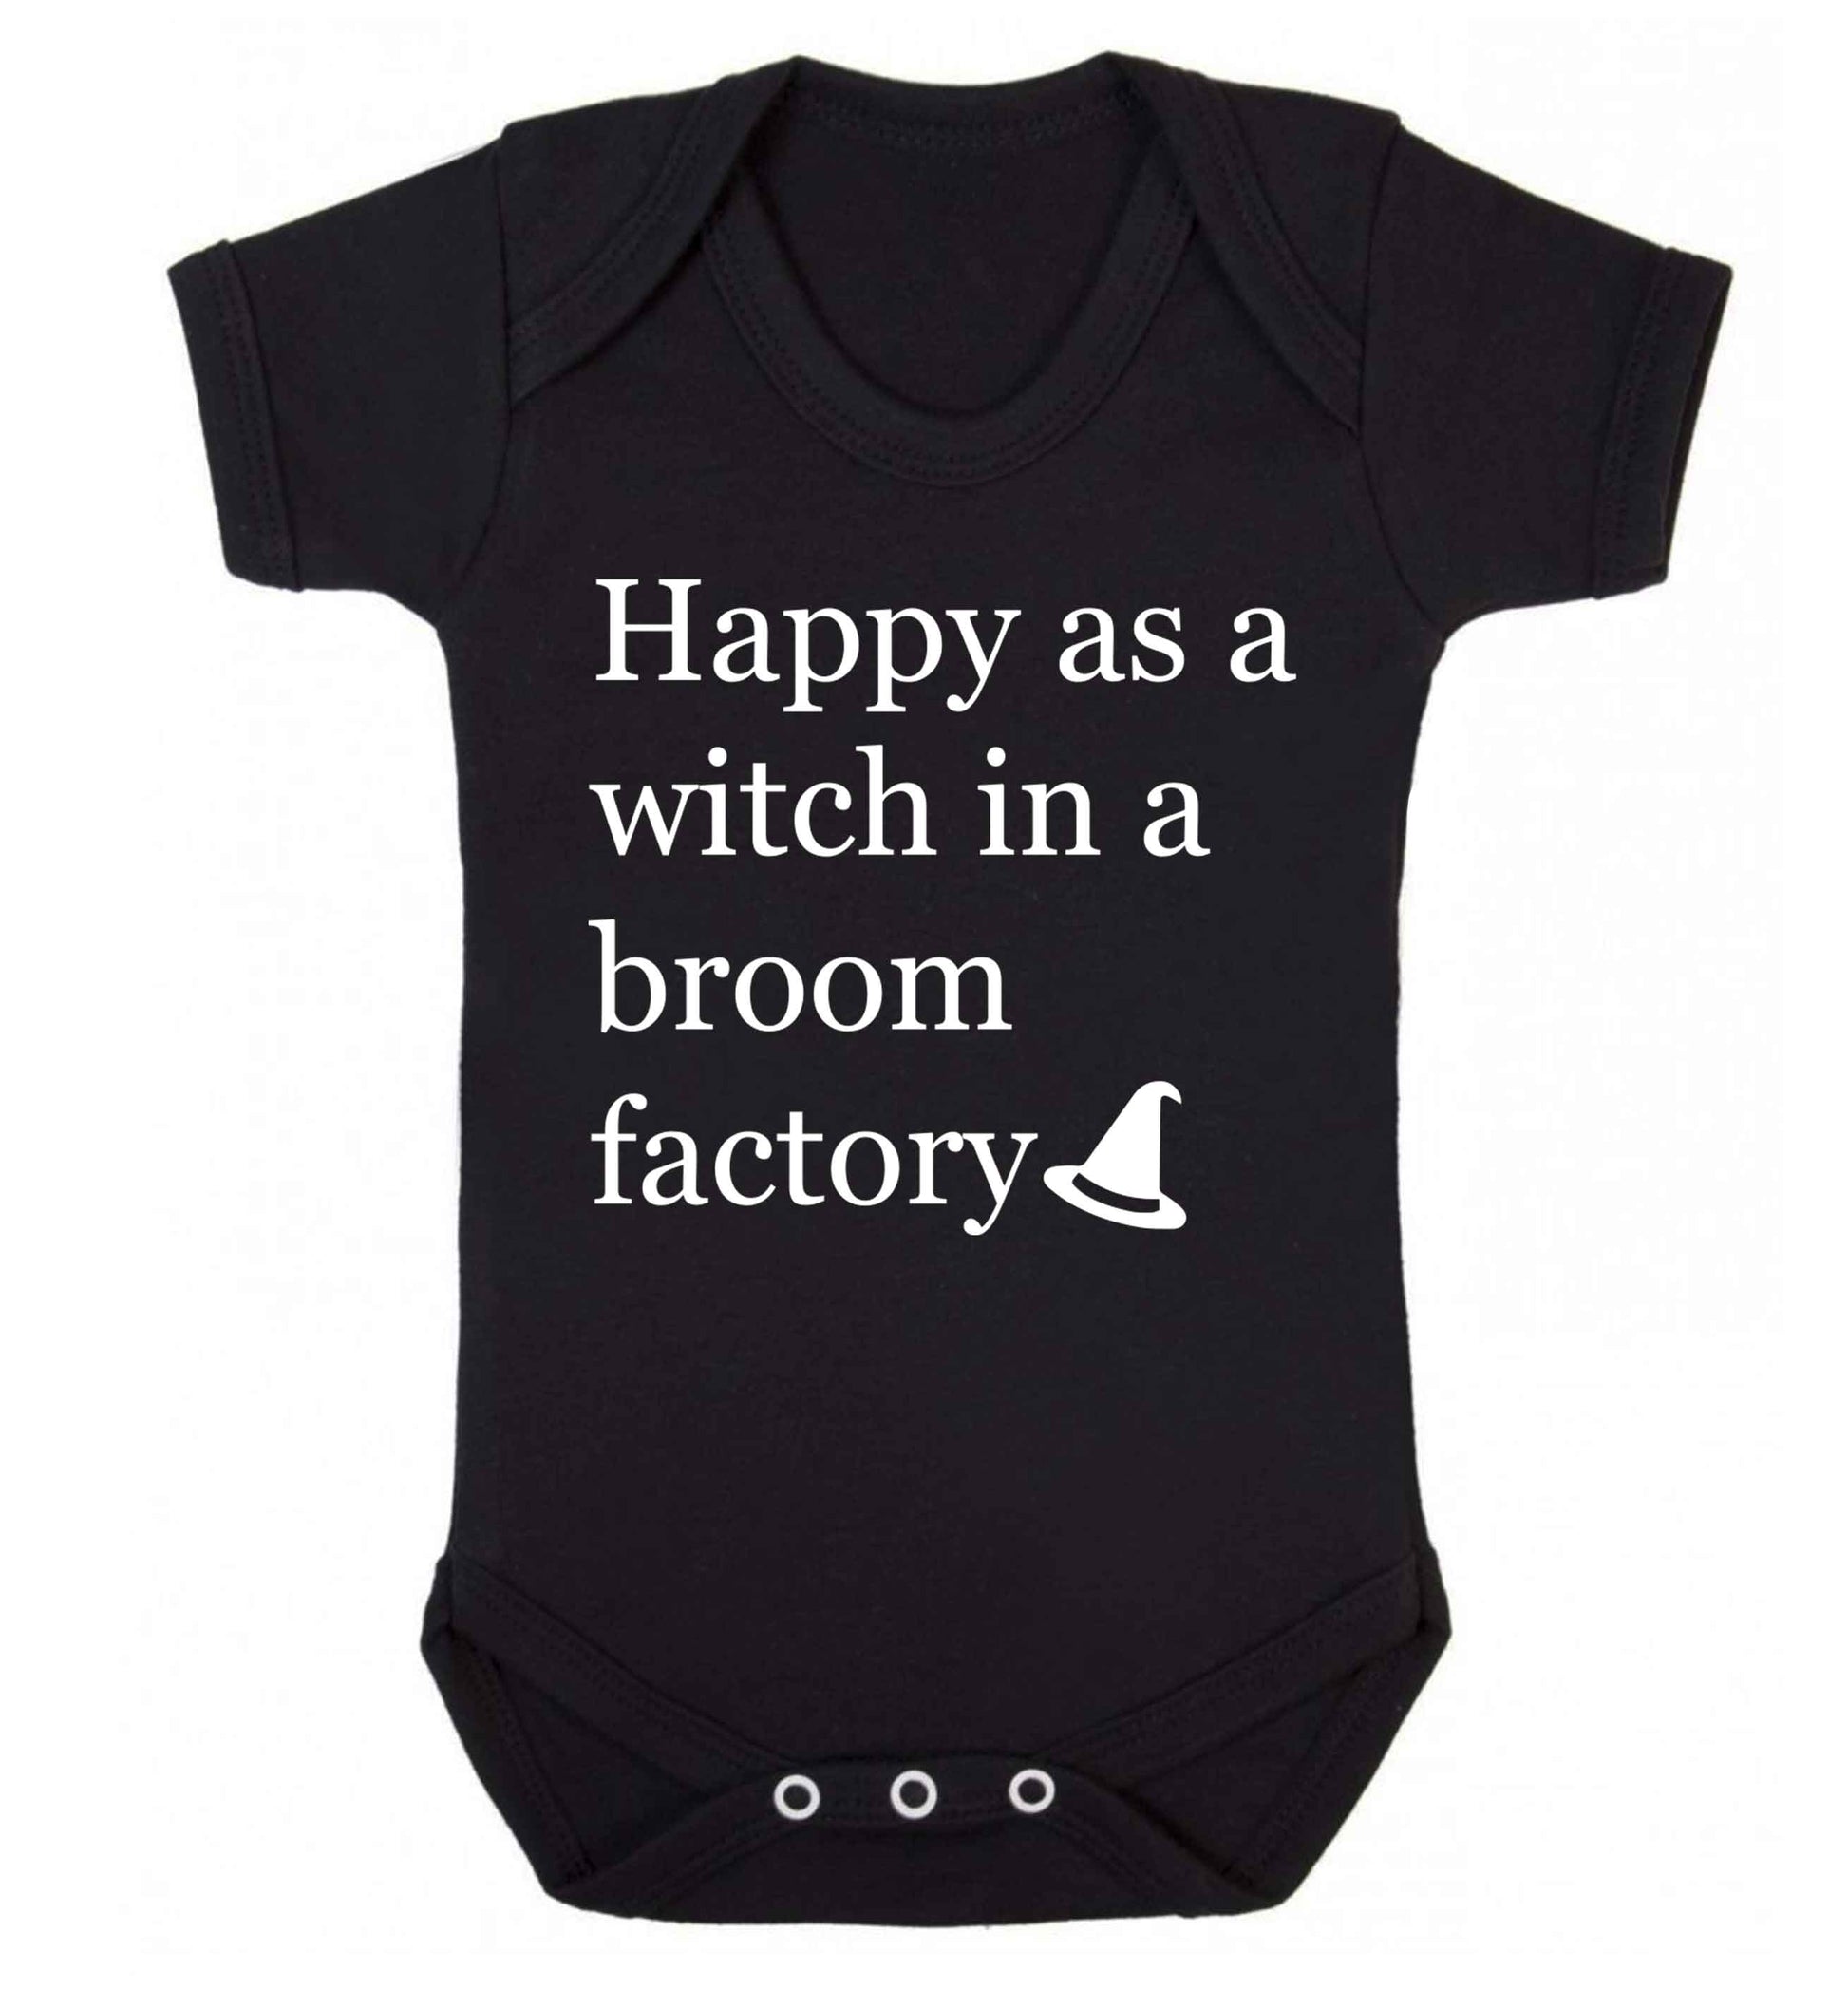 Happy as a witch in a broom factory Baby Vest black 18-24 months